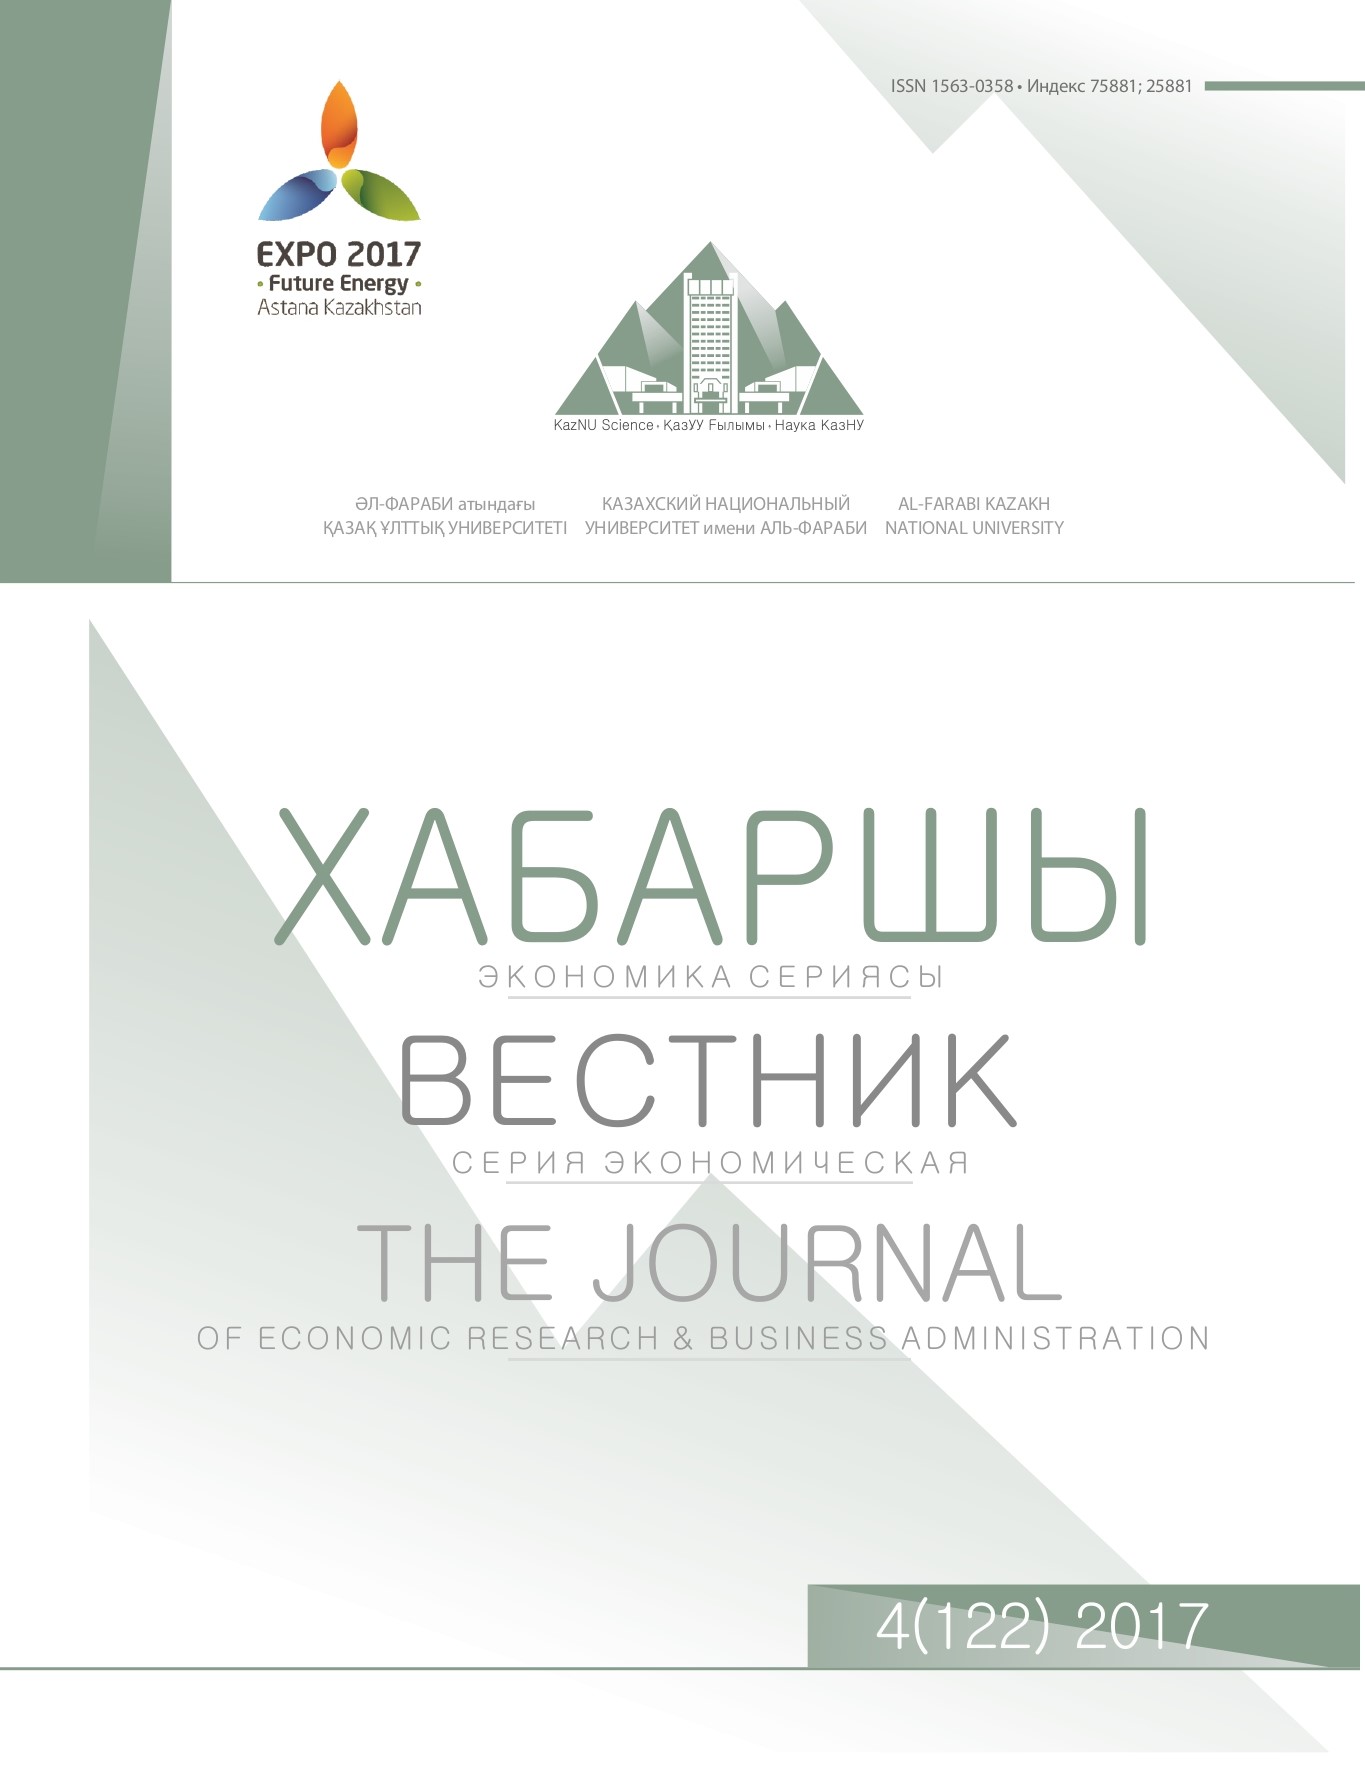 					View Vol. 122 No. 4 (2017): The Journal of Economic Research & Business Administration
				